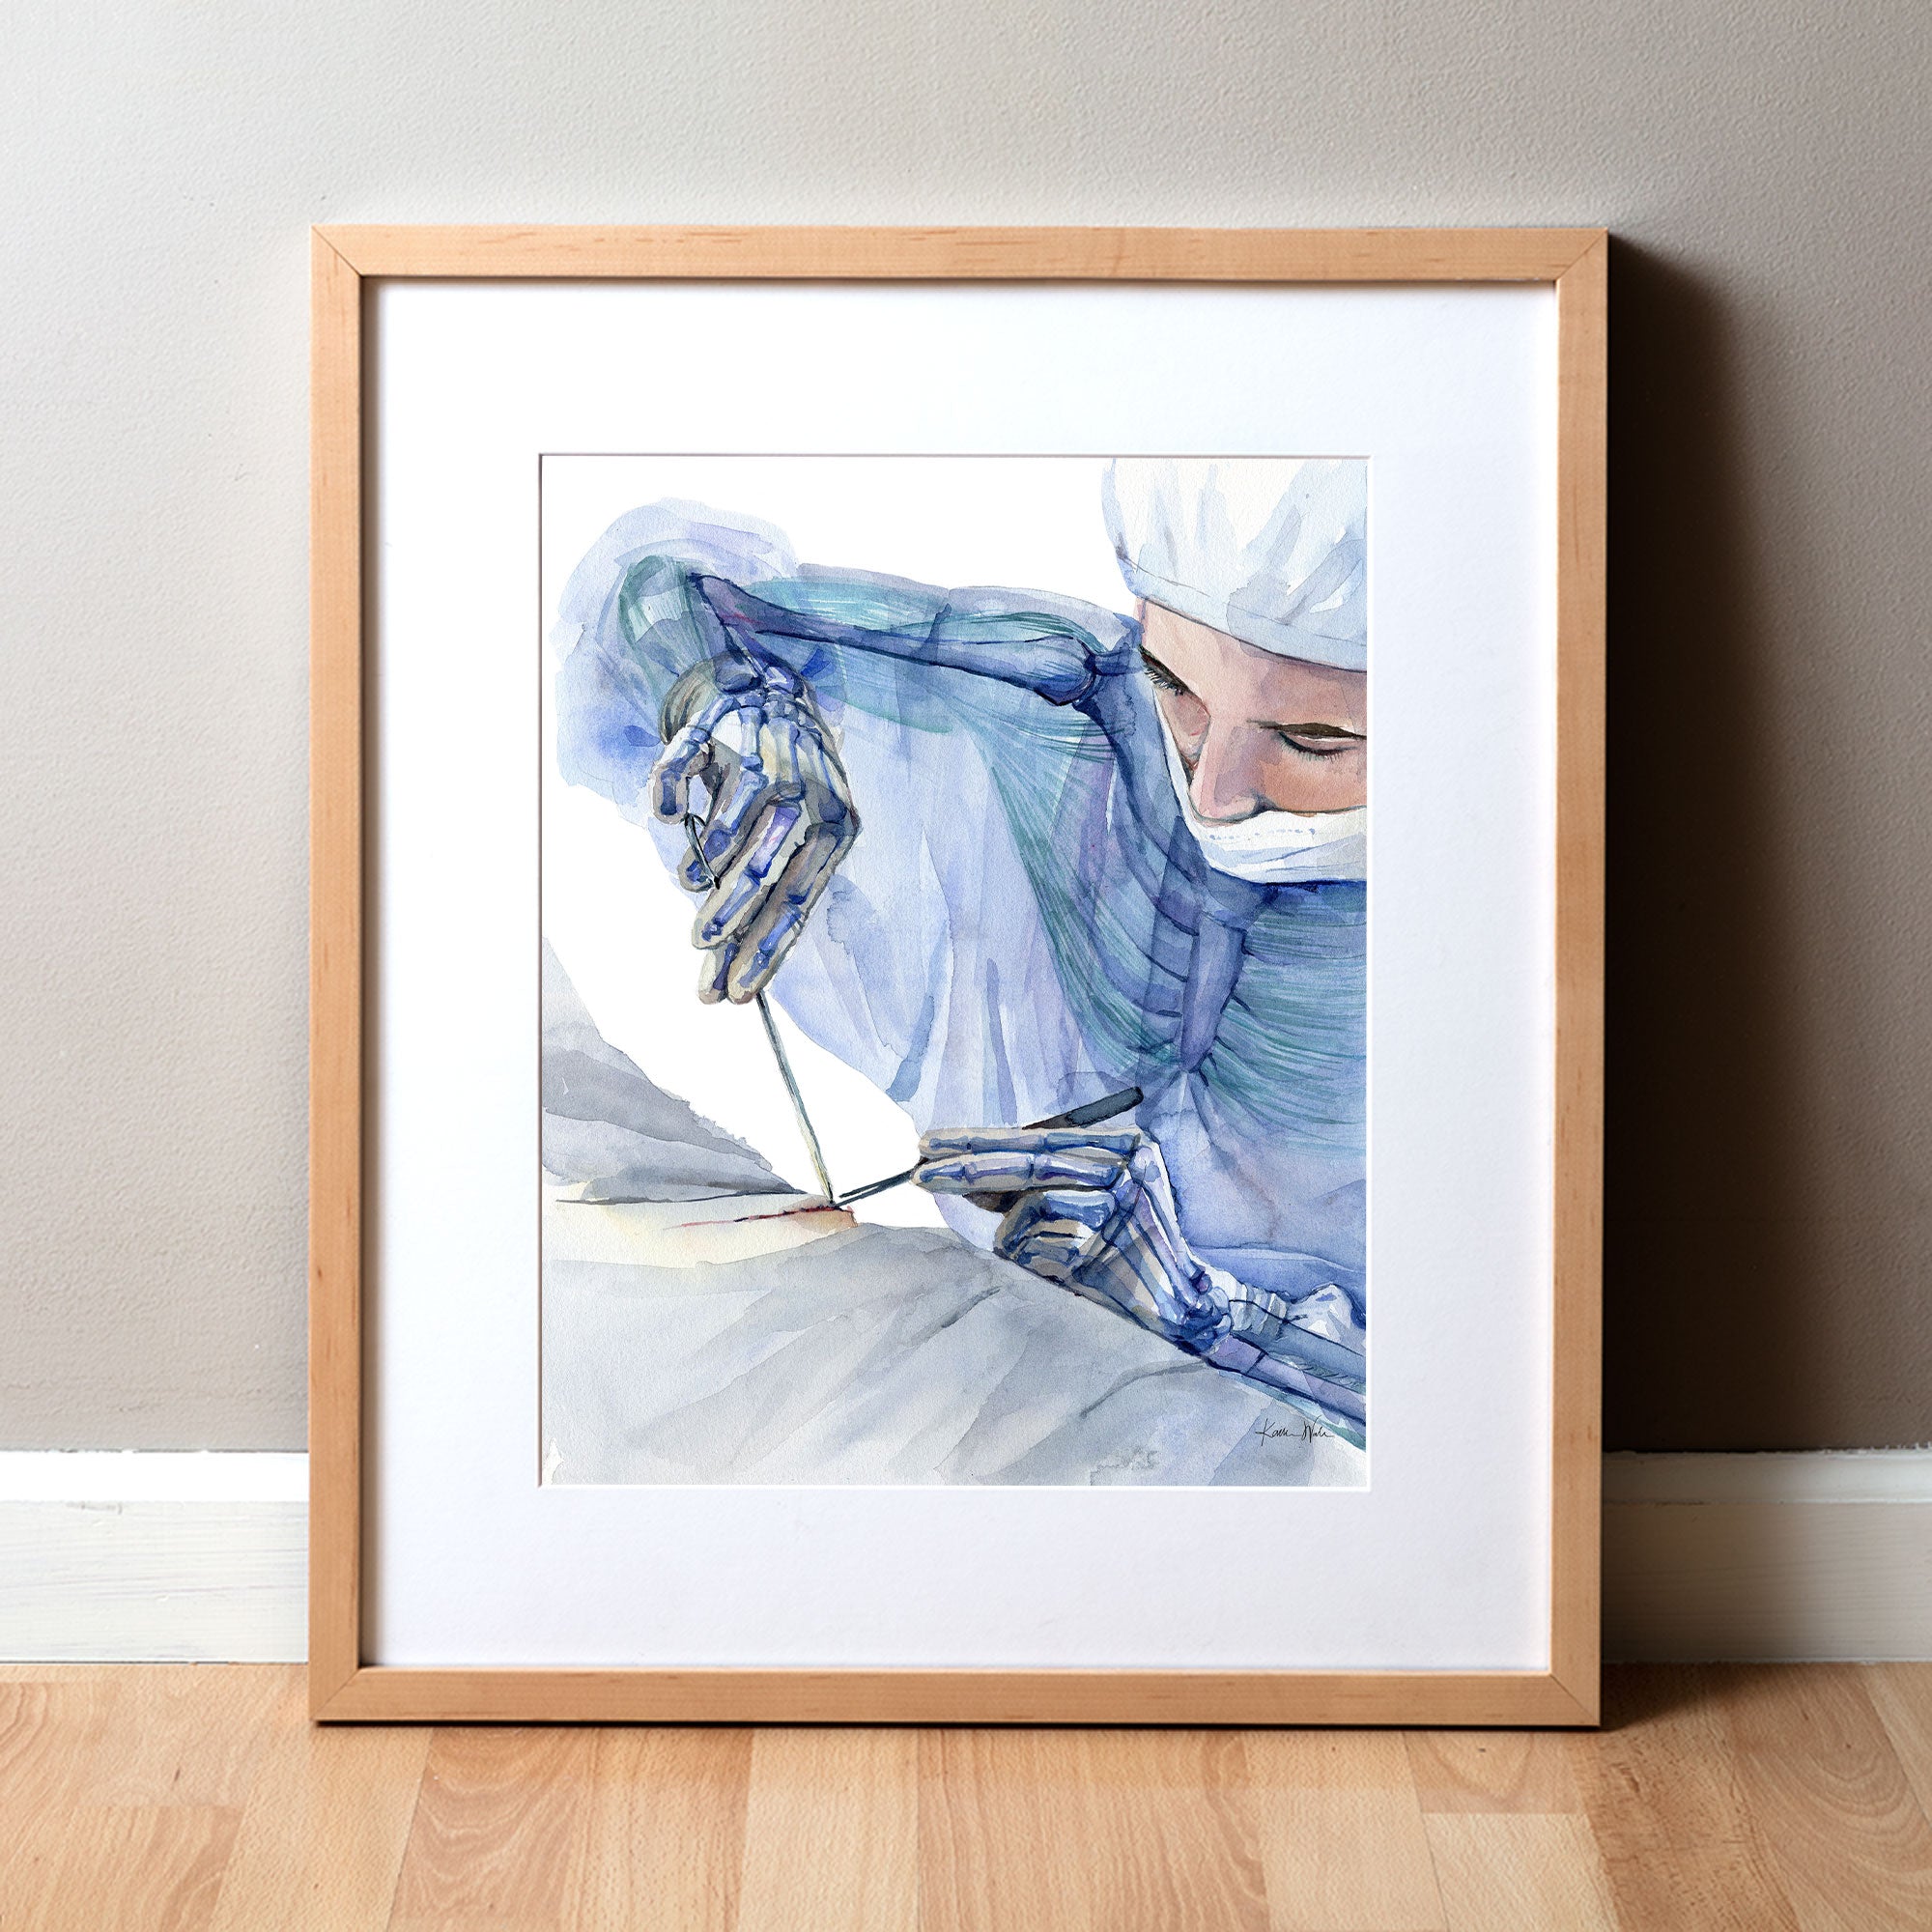 Framed watercolor painting showing the ergonomics of a surgeon at work.